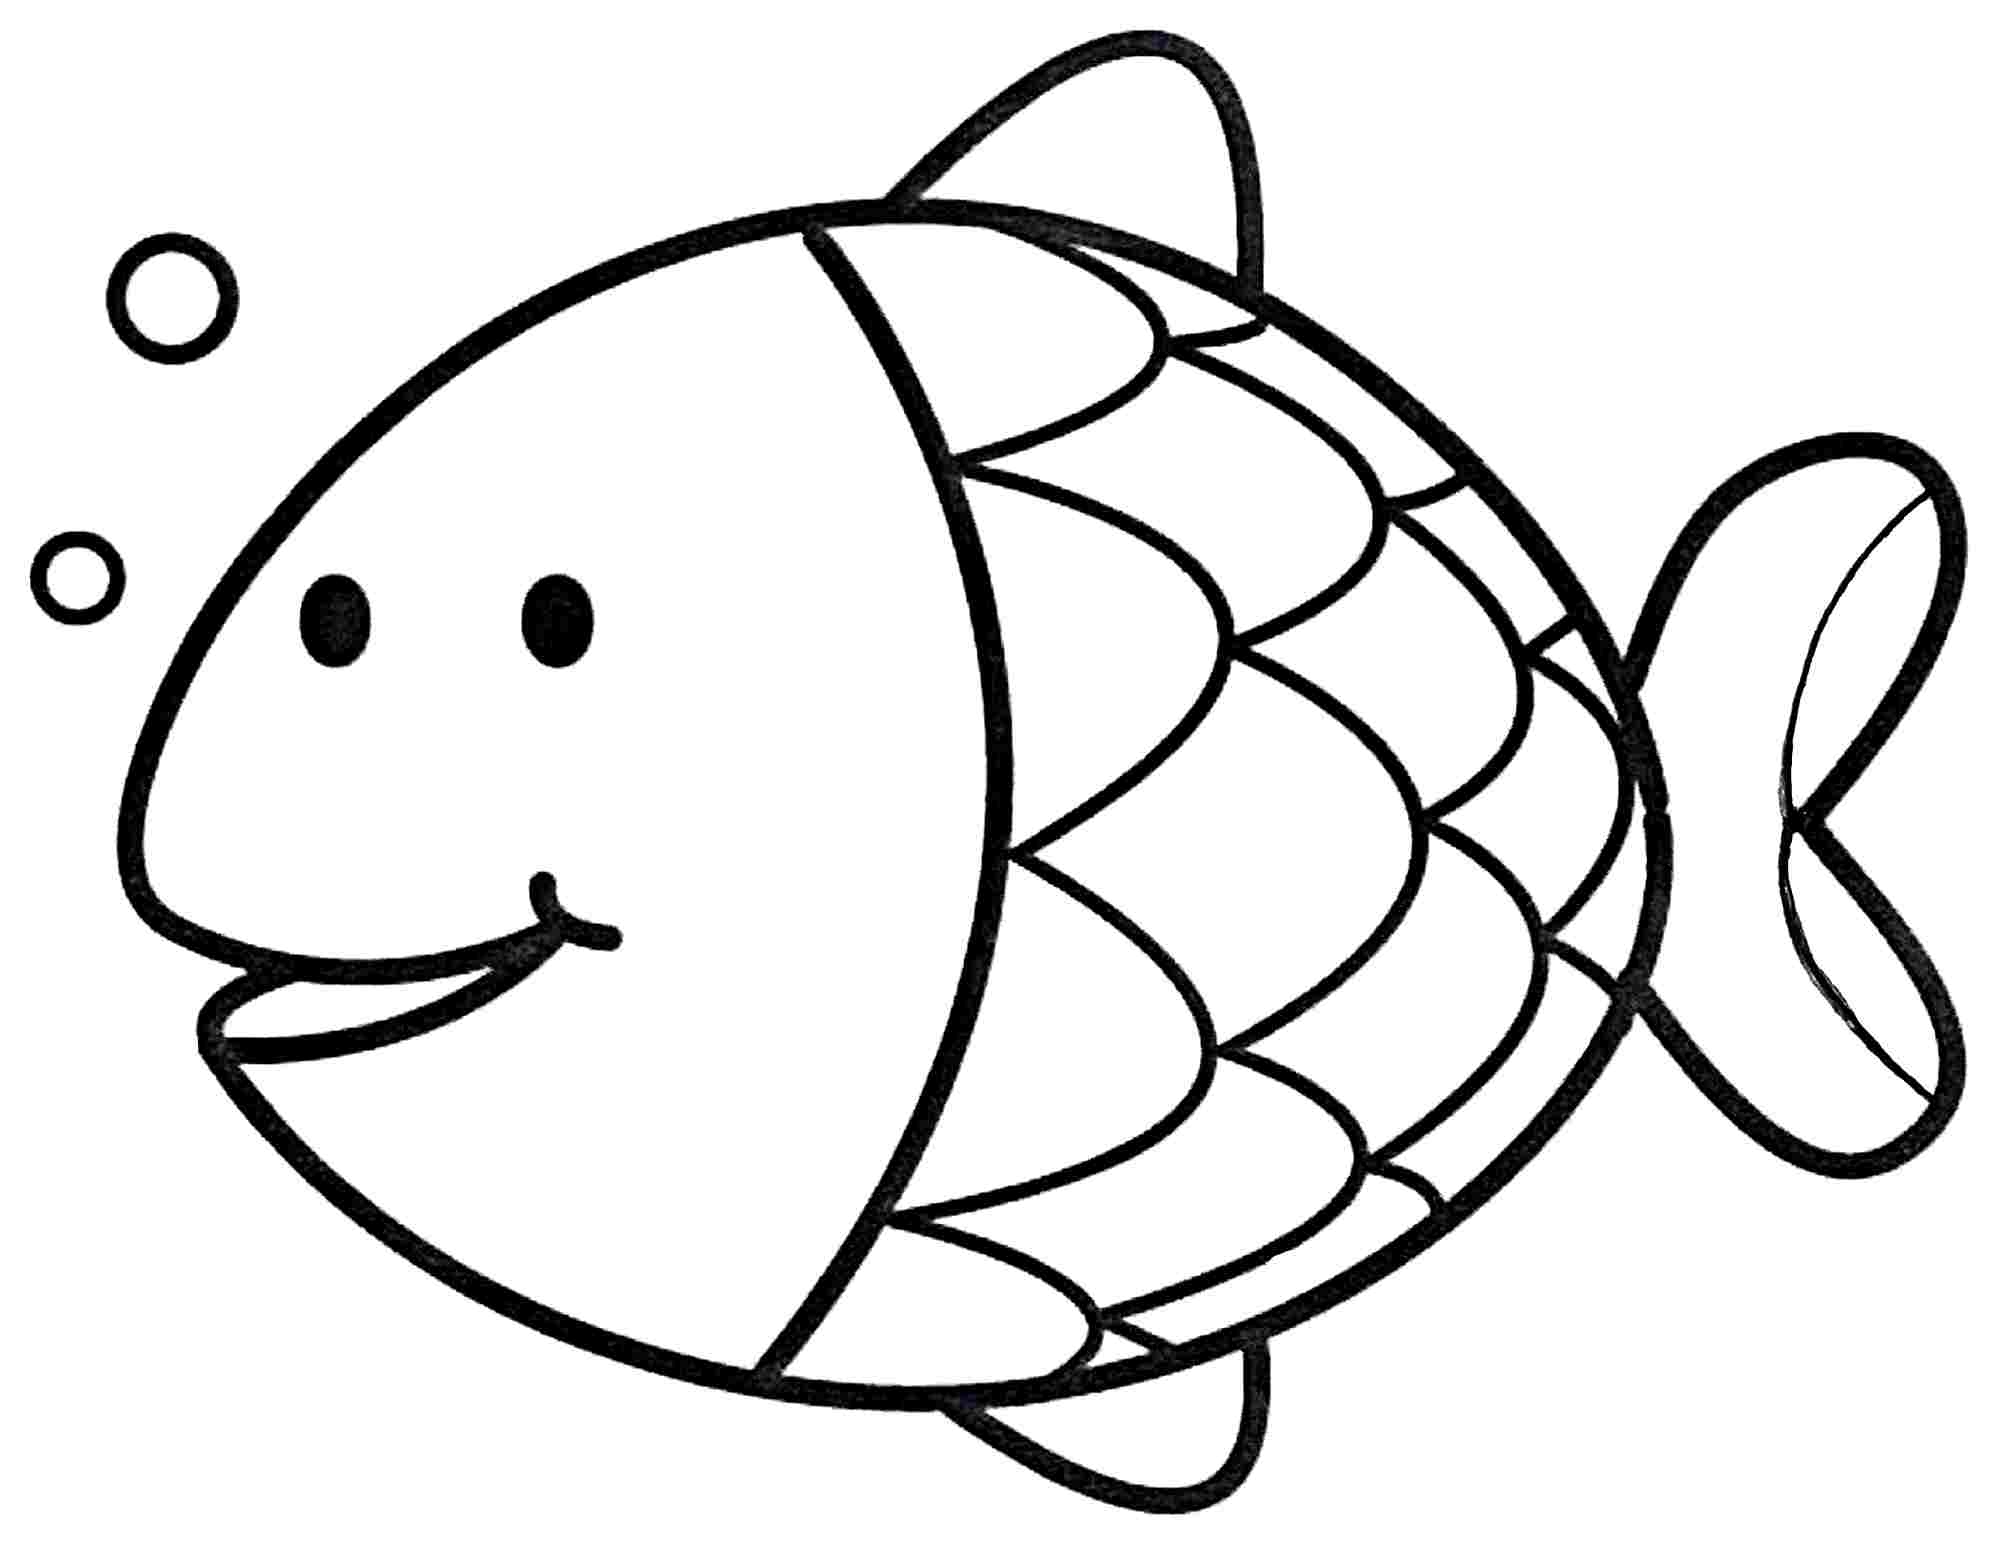 Coloring Page Fish   Whataboutmimi.com   ClipArt Best   ClipArt Best